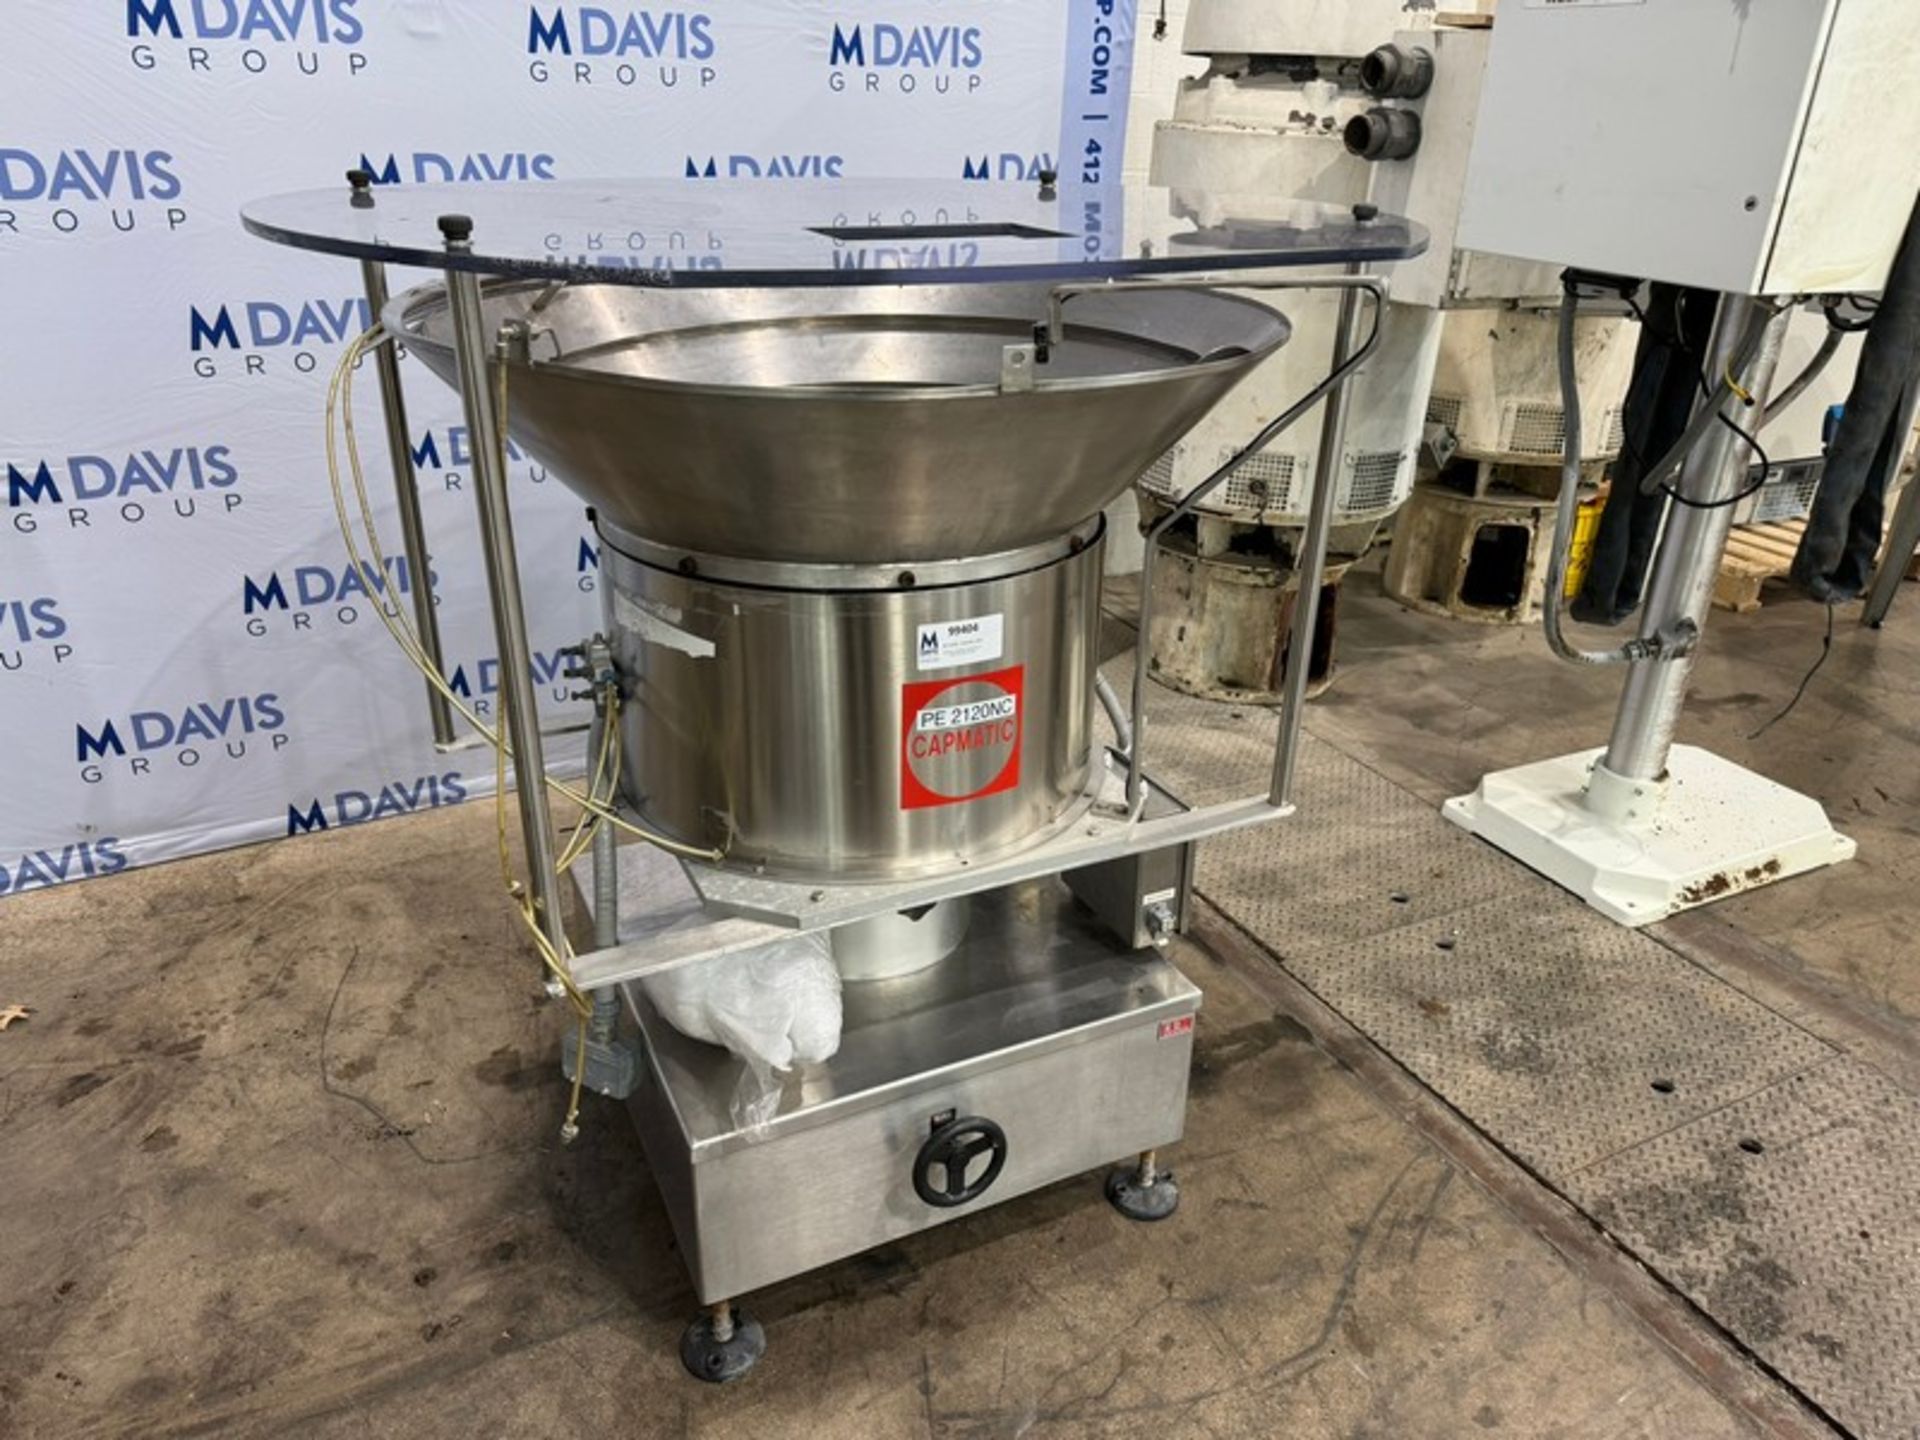 Capmatic S/S Vibratory Hopper, Mounted on S/S Frame (INV#99404) (Located @ the MDG Auction - Image 2 of 8